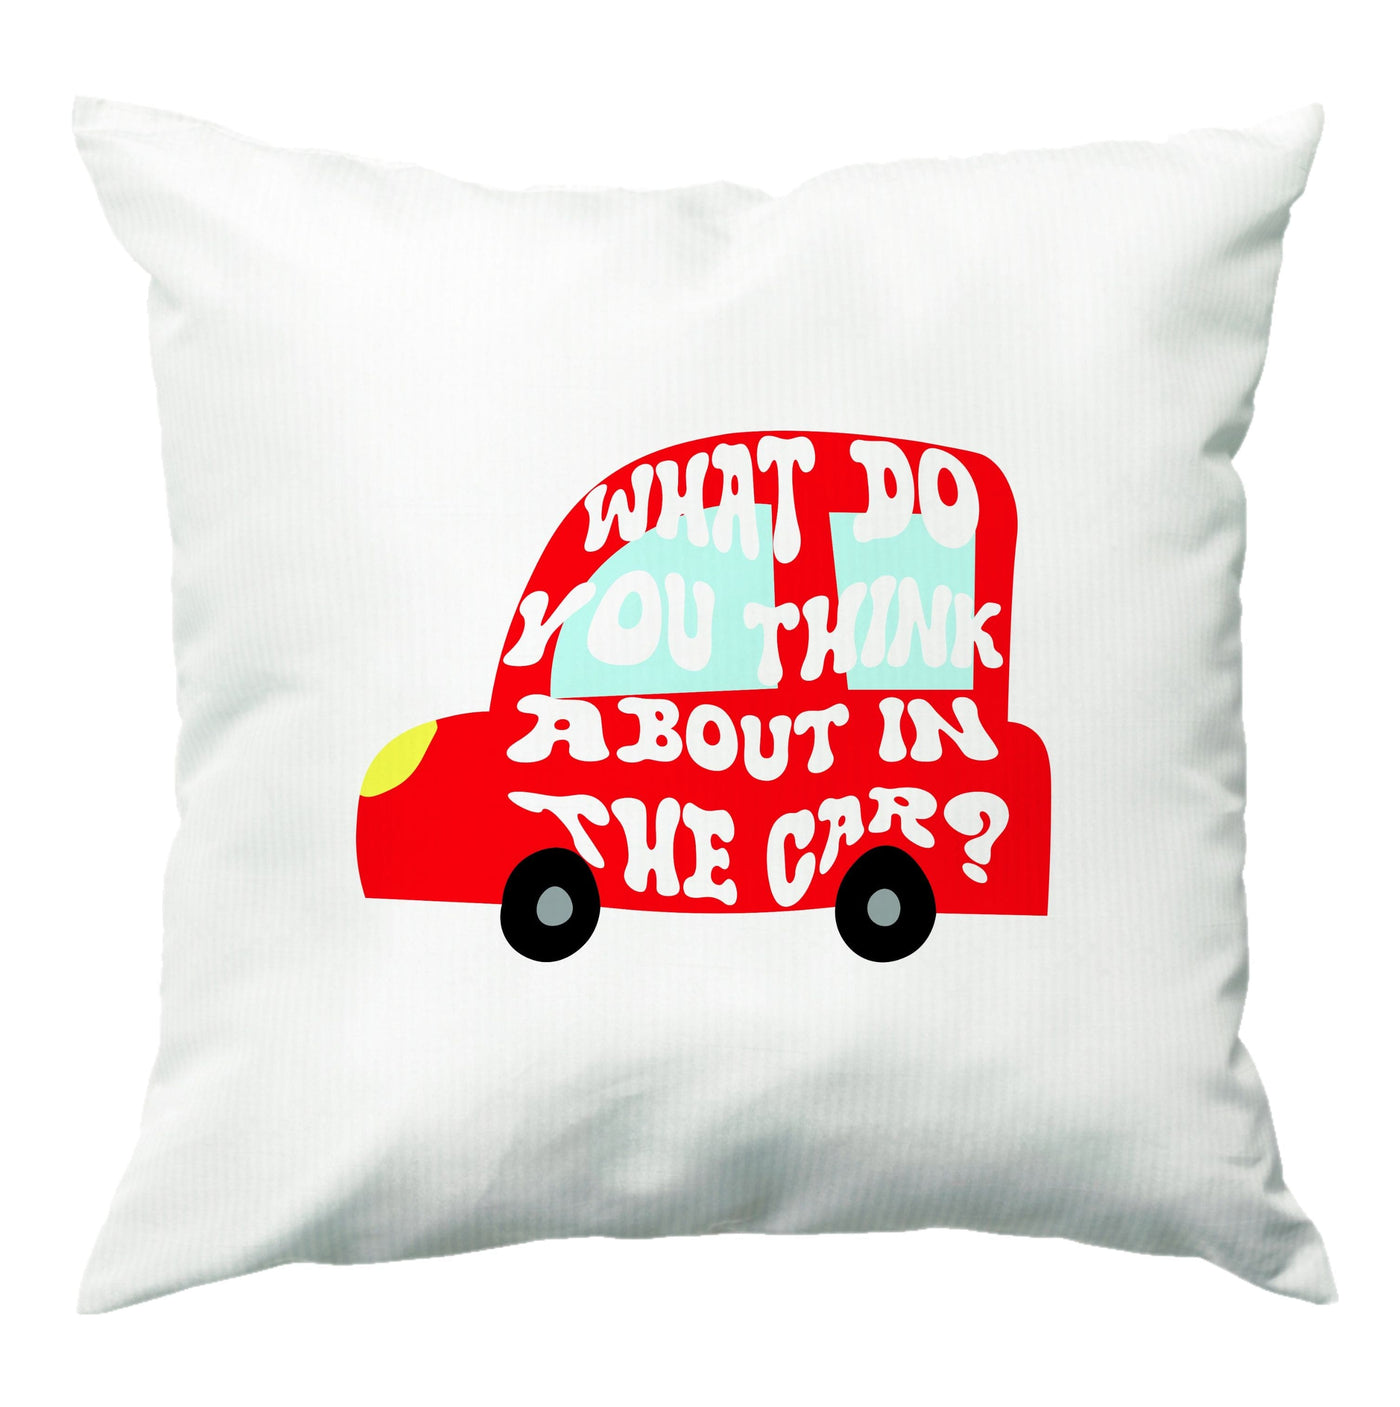 What Do You Think About In The Car? - Declan Mckenna Cushion